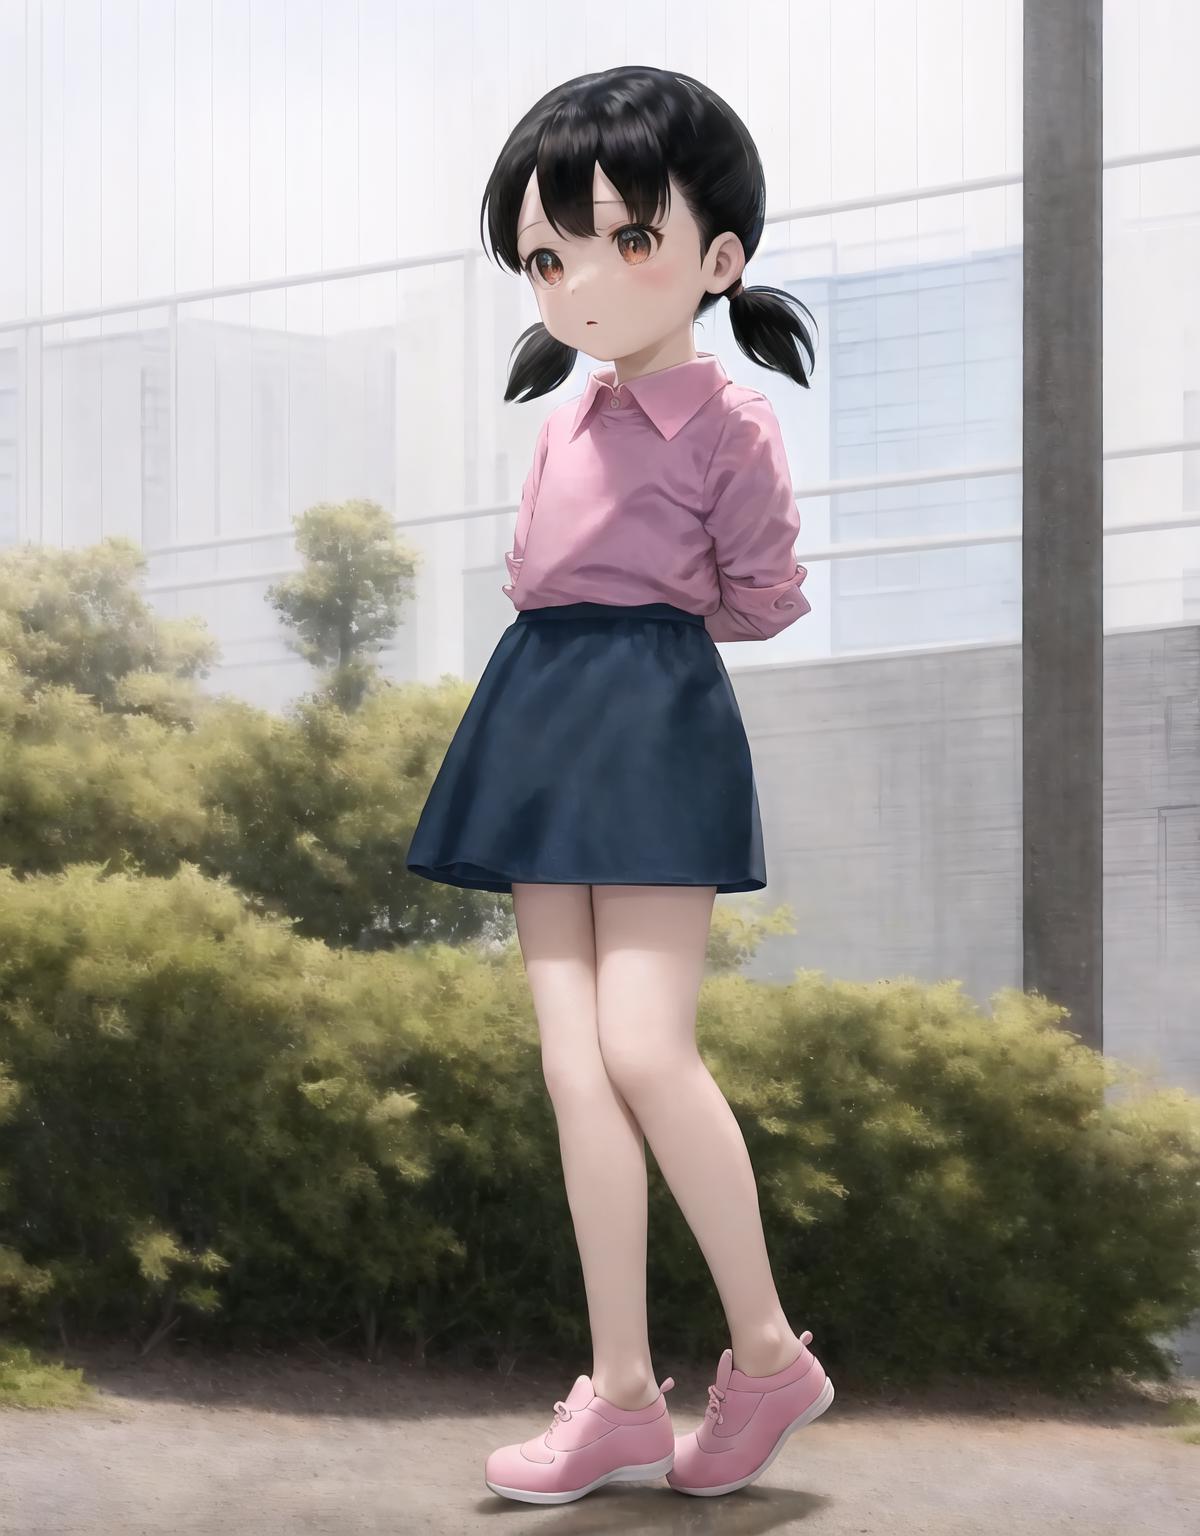 AI model image by lolicon13